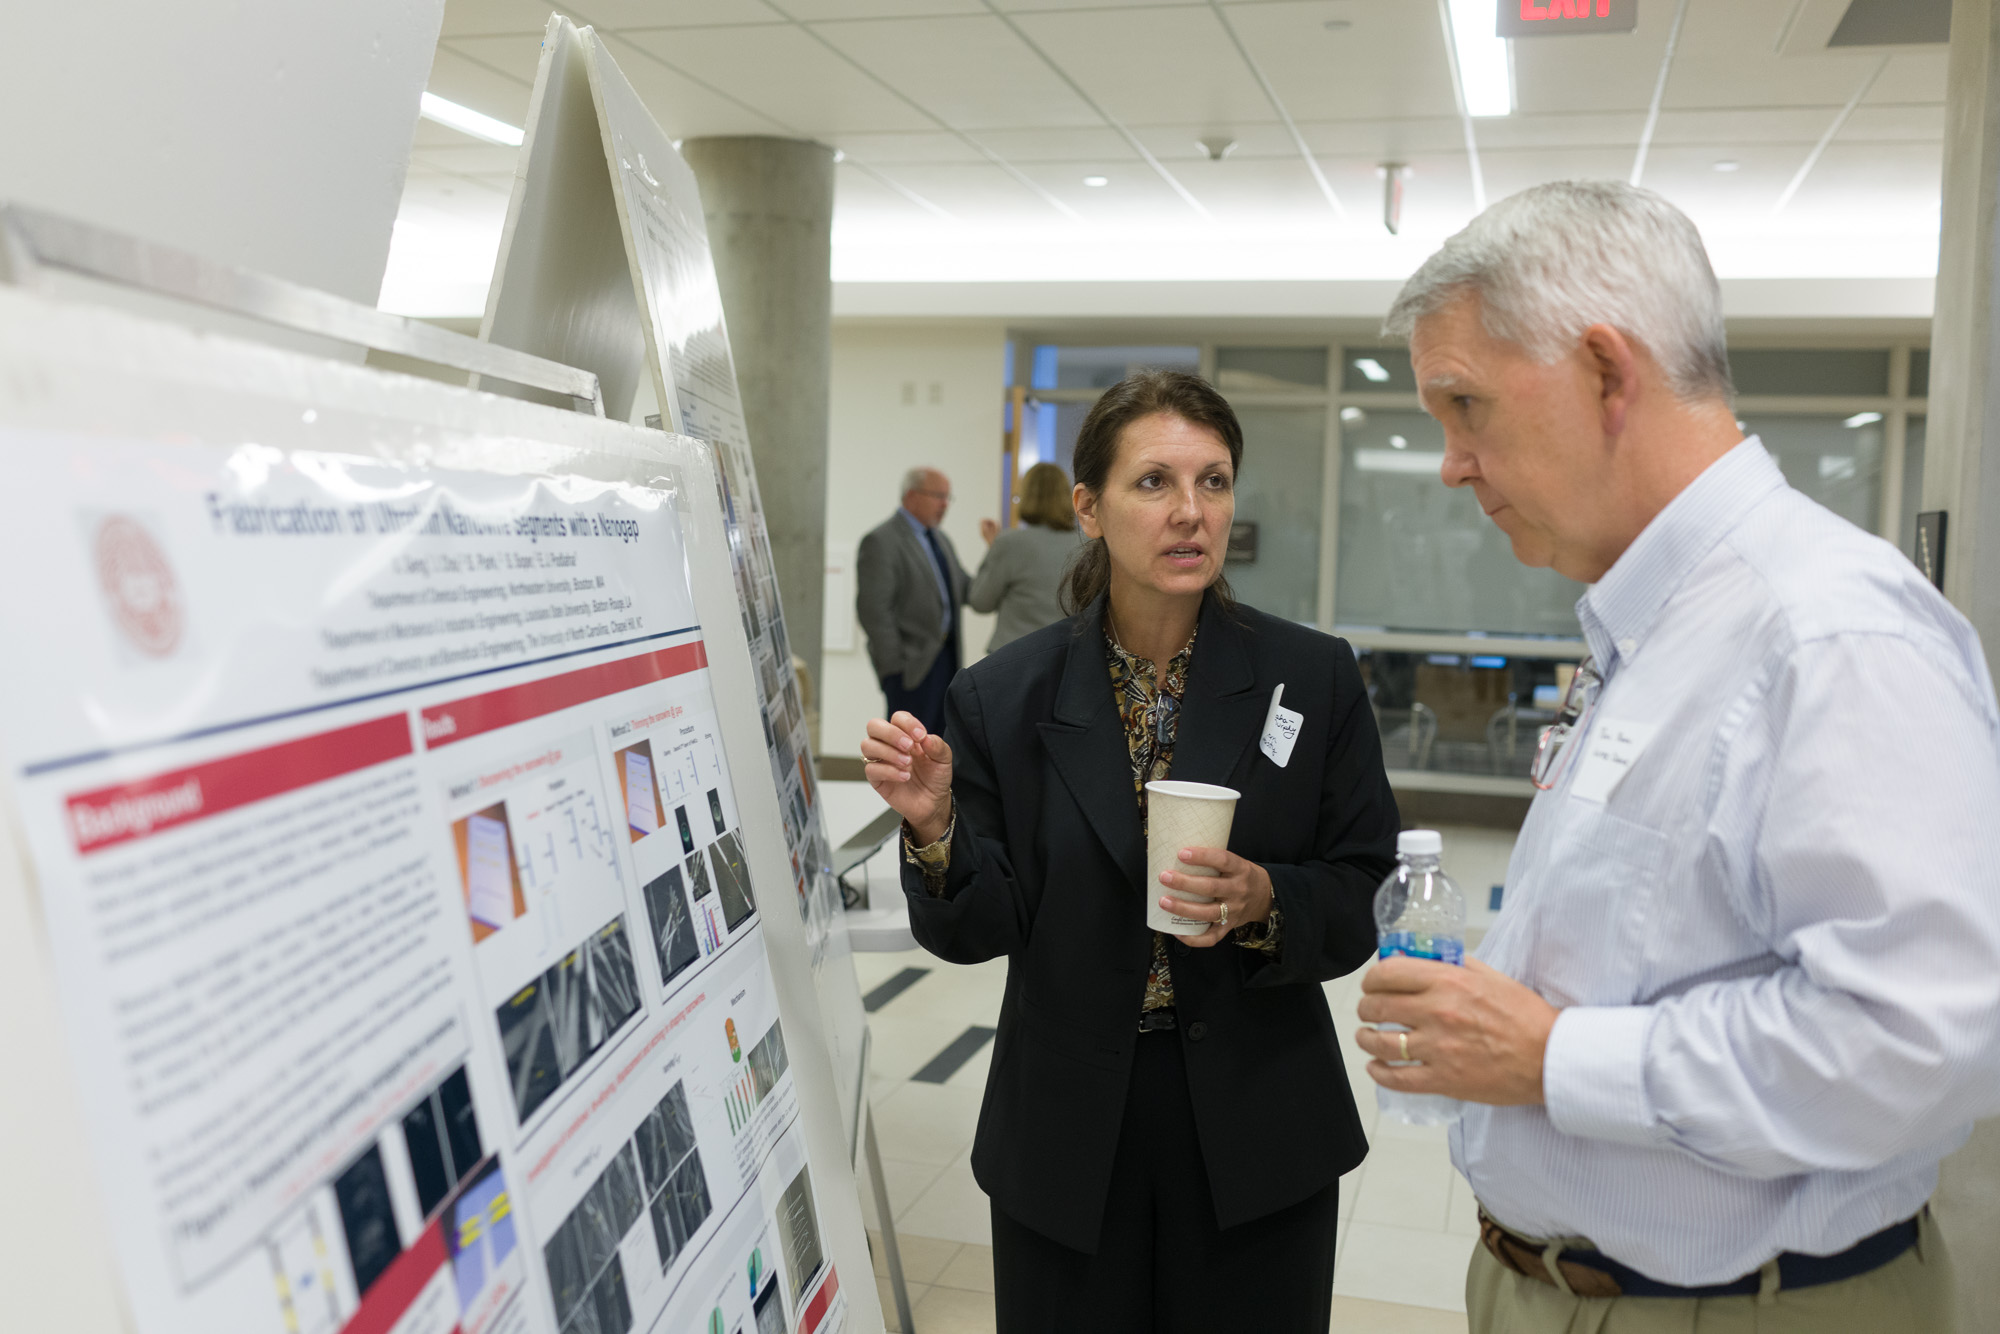 A woman named Eleanor discusses a scientific poster with a man at a conference.